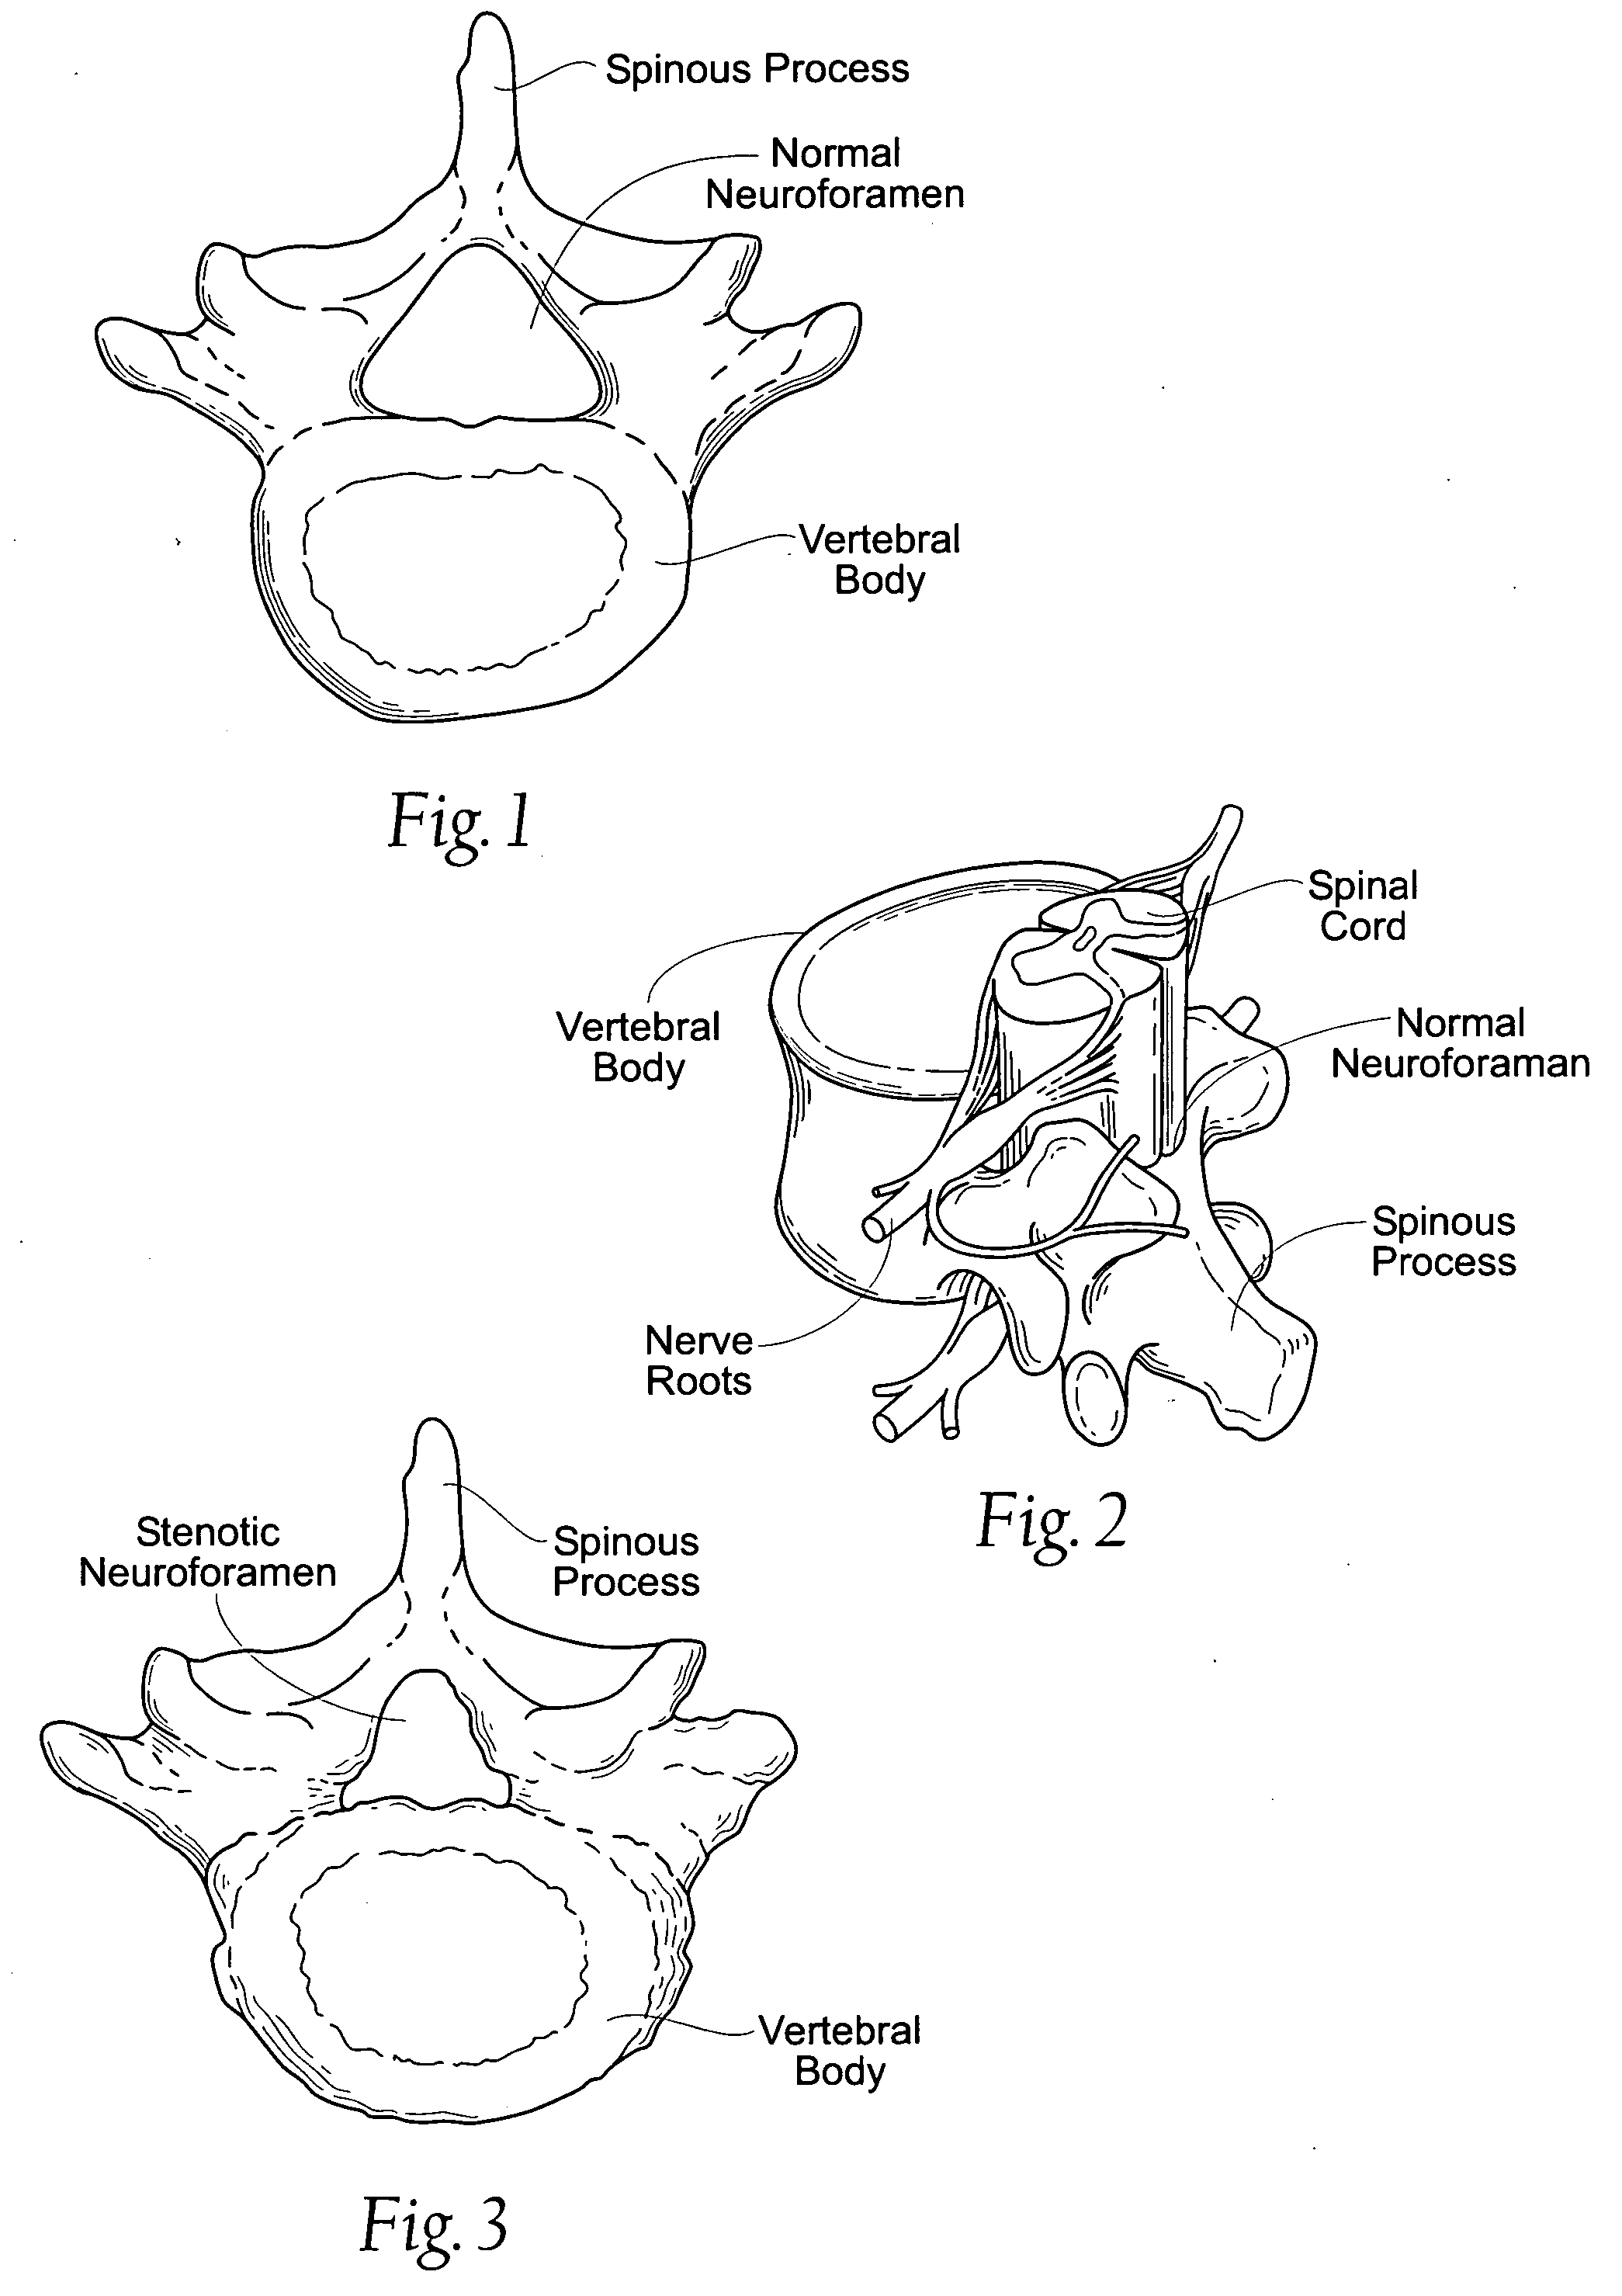 Percutaneous spine distraction implant systems and methods